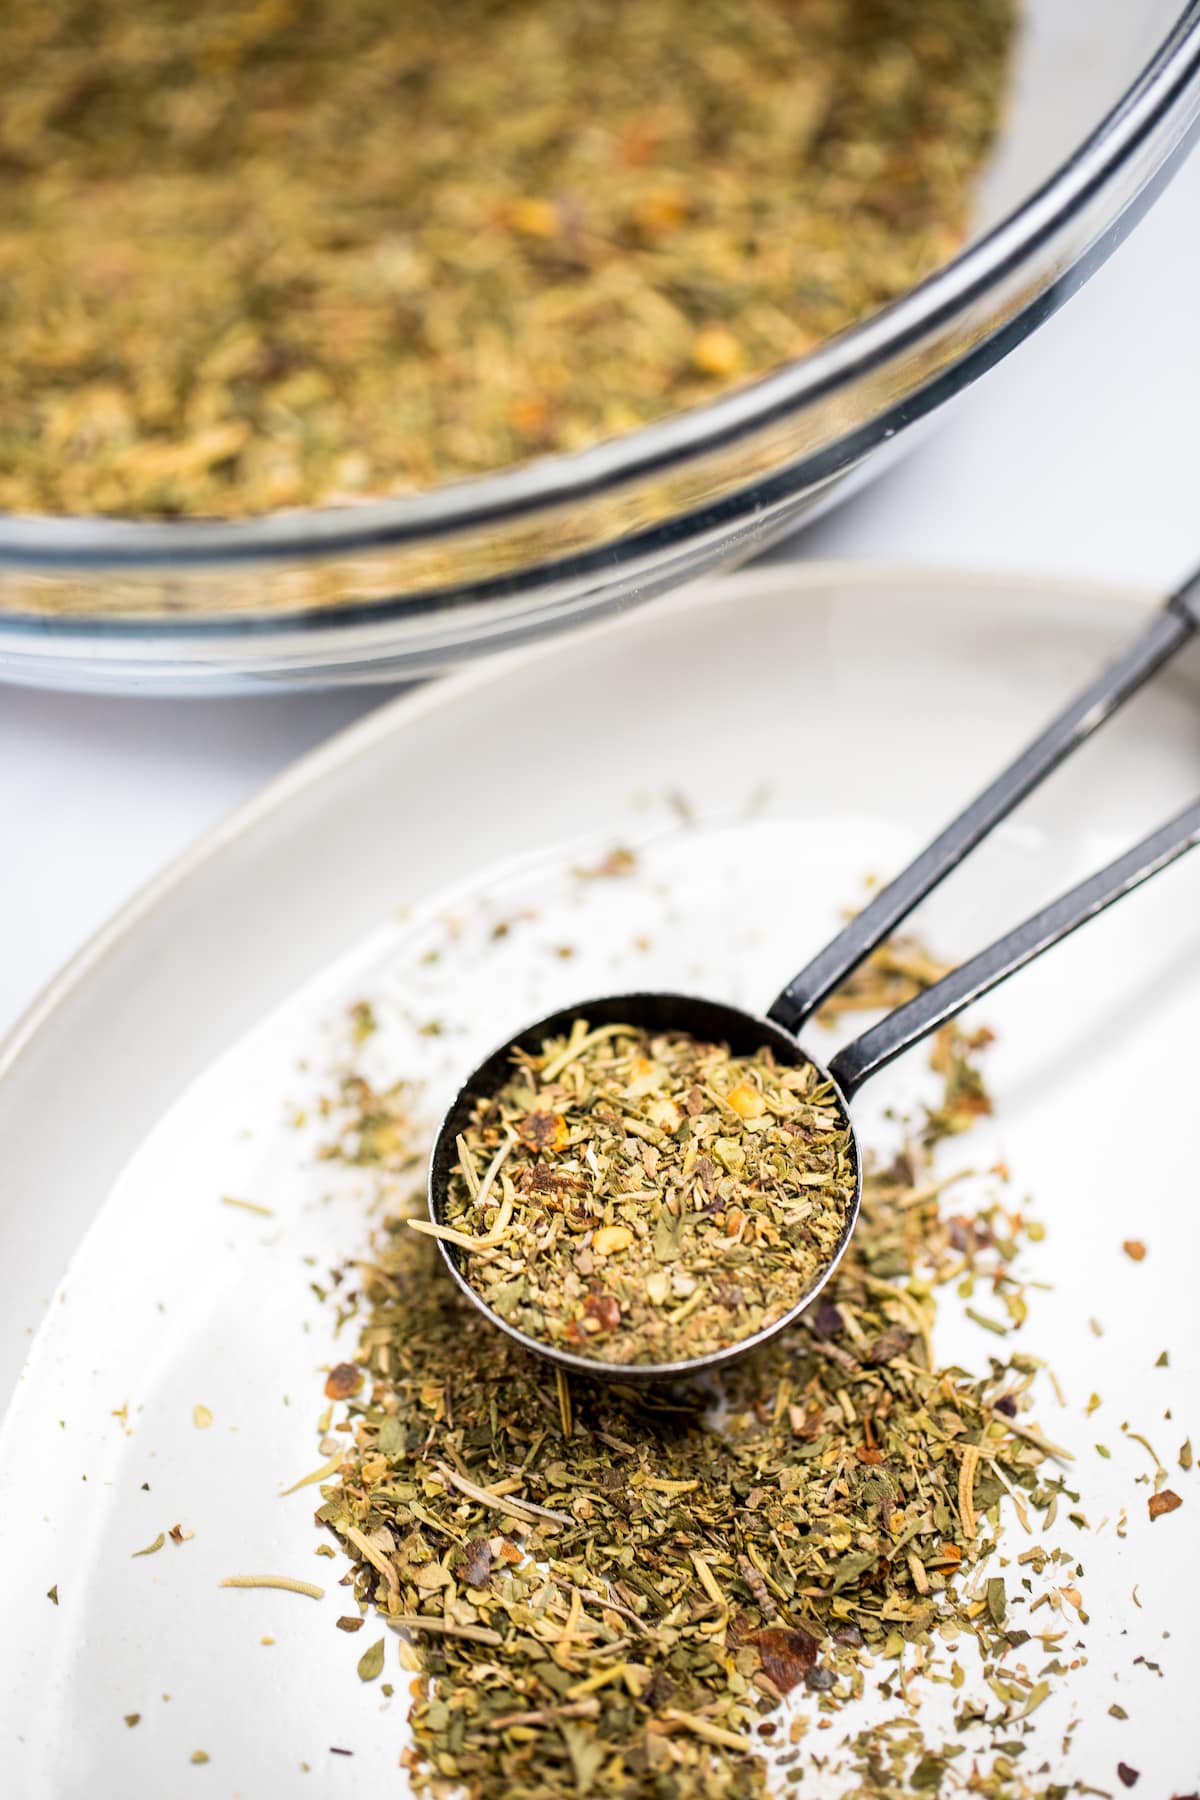 A measuring spoon with a scoop of Italian Seasoning from a bowl of herbs and spices, on a plate with the spice blend spilling out.